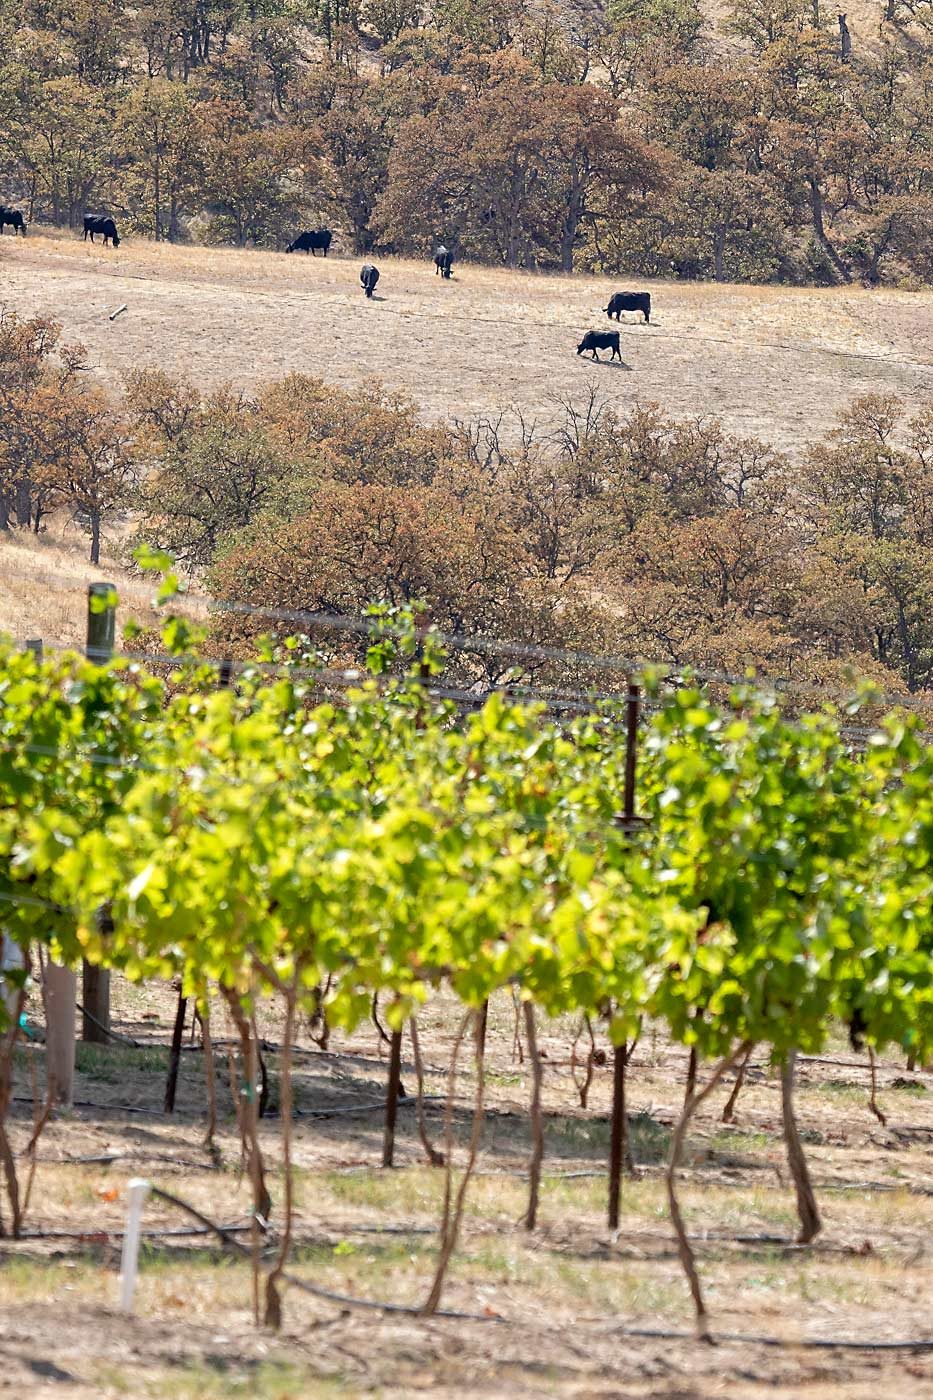 Southwest of The Dalles and just outside of the Columbia River Gorge National Scenic Area, Windhorse Vineyard’s surrounding area is relatively uncultivated ranch land. (TJ Mullinax/Good Fruit Grower)